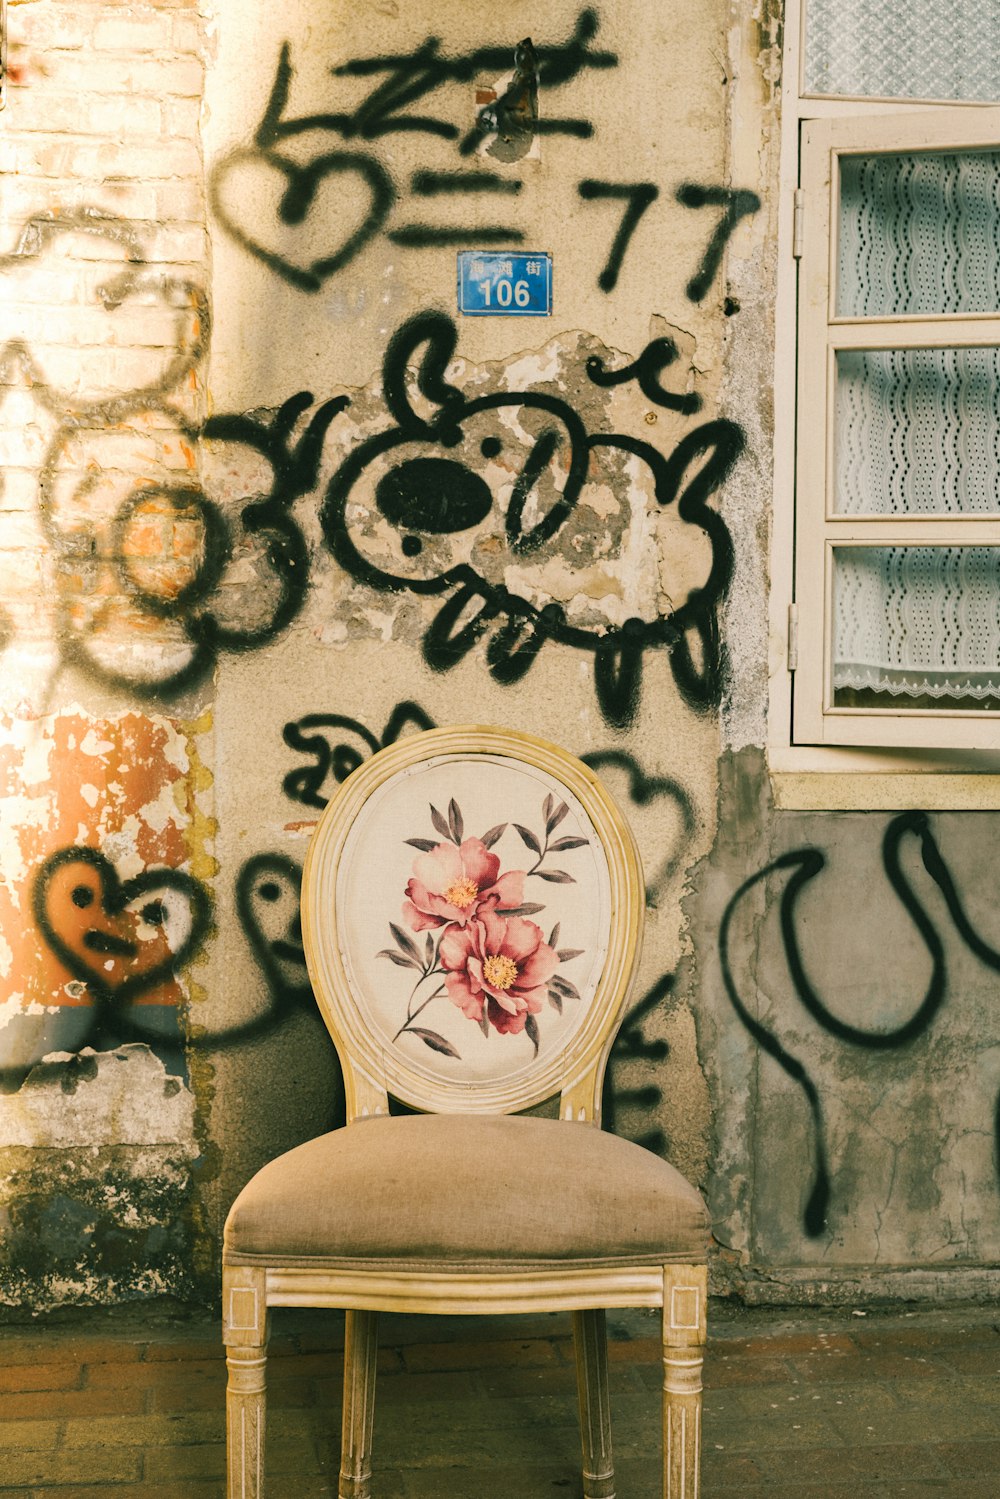 a chair sitting in front of a wall covered in graffiti